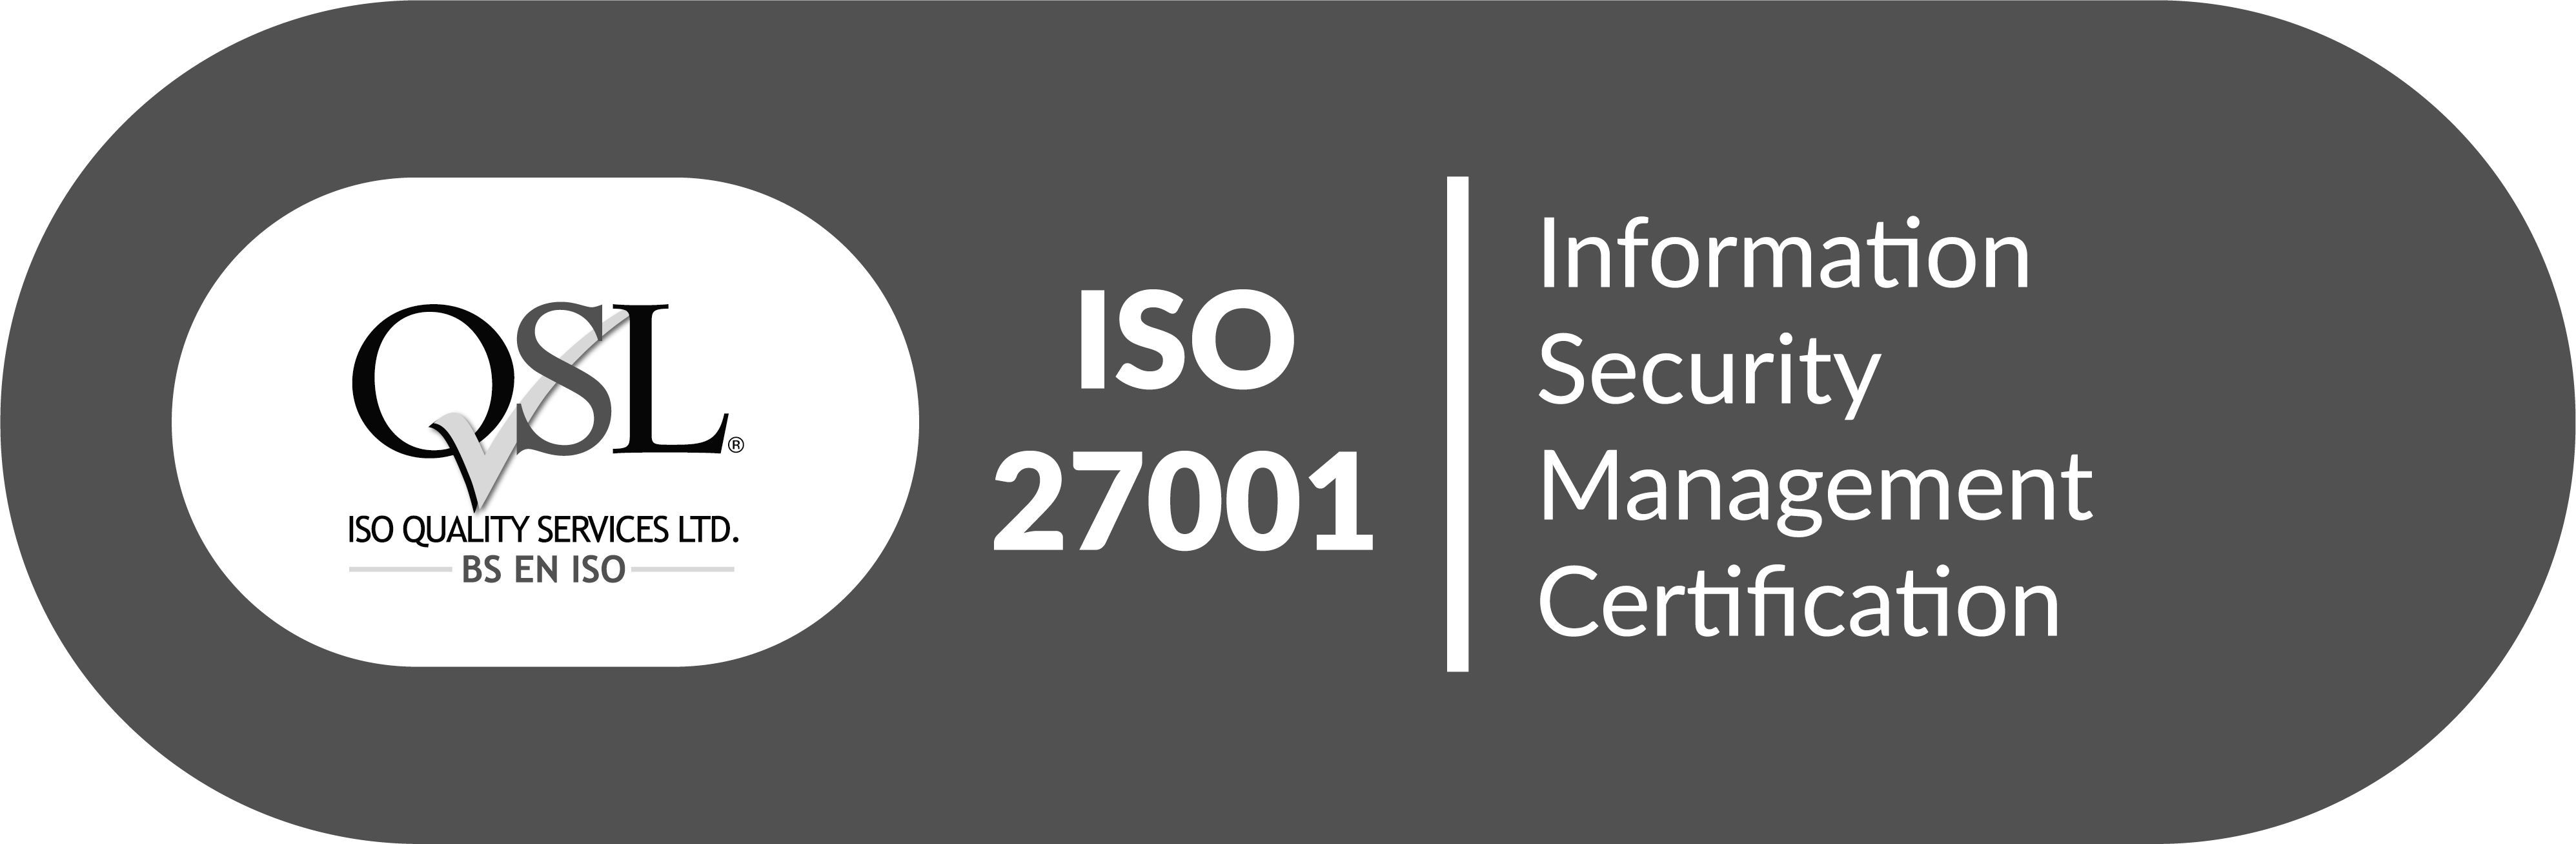 ISO 27001 Information Security Certification badge